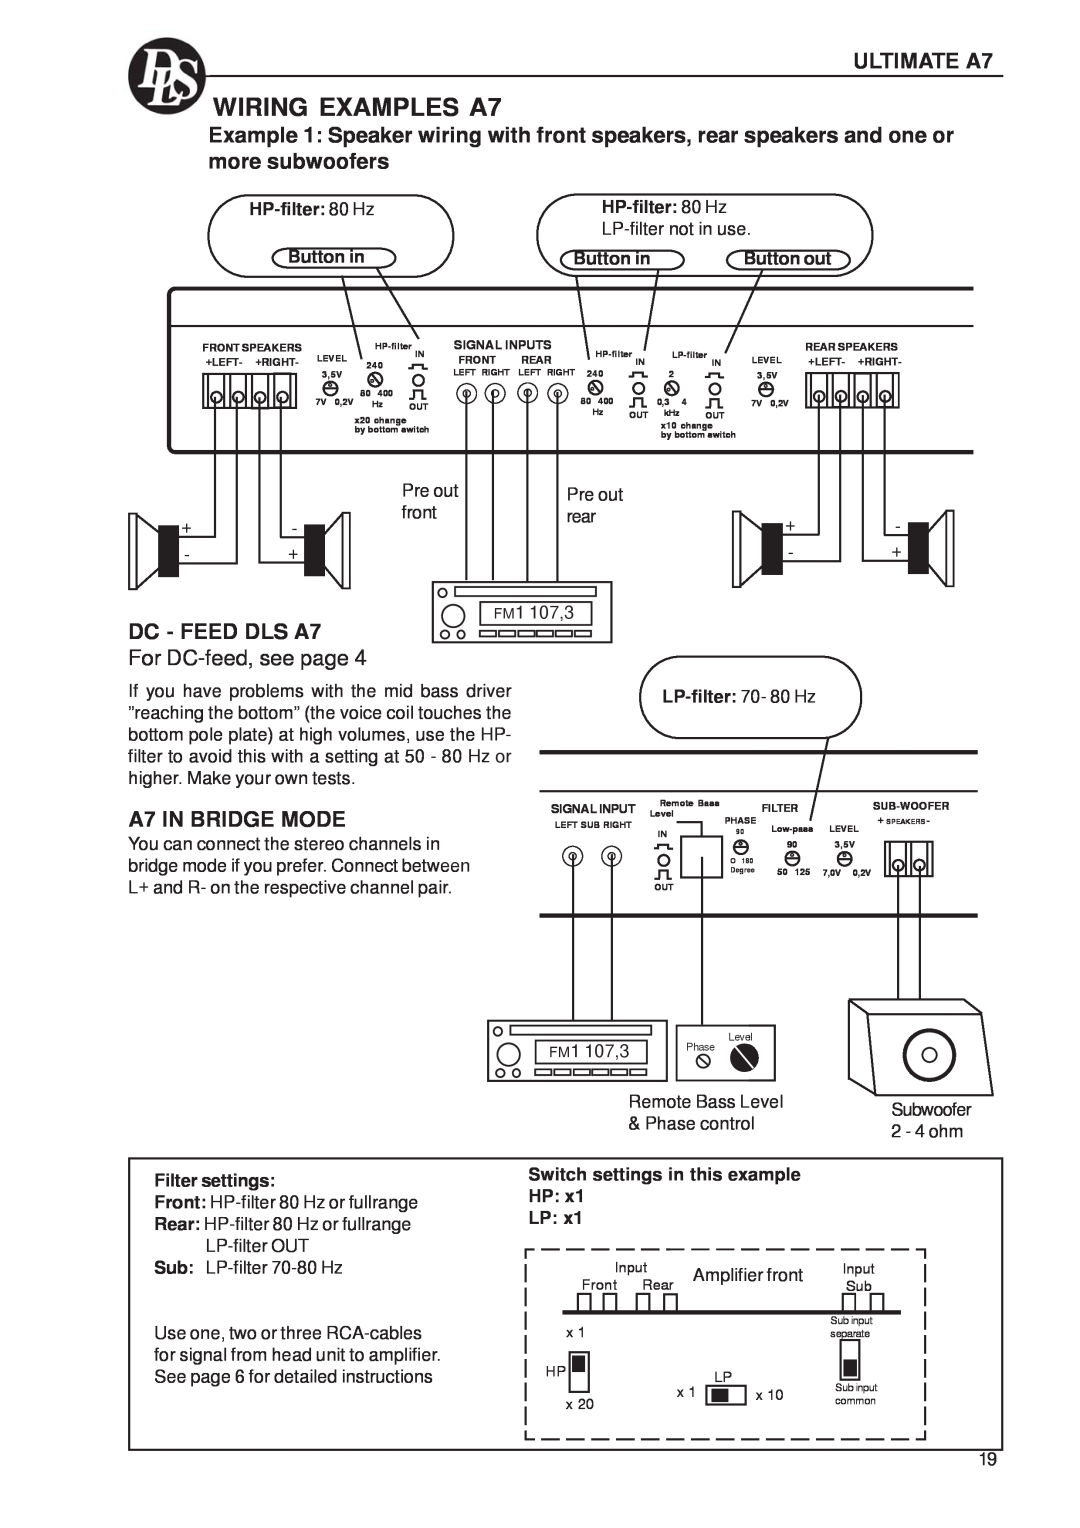 DLS Svenska AB A1, A5, A2, A6 WIRING EXAMPLES A7, DC - FEED DLS A7, For DC-feed,see page, A7 IN BRIDGE MODE, HP-filter 80 Hz 